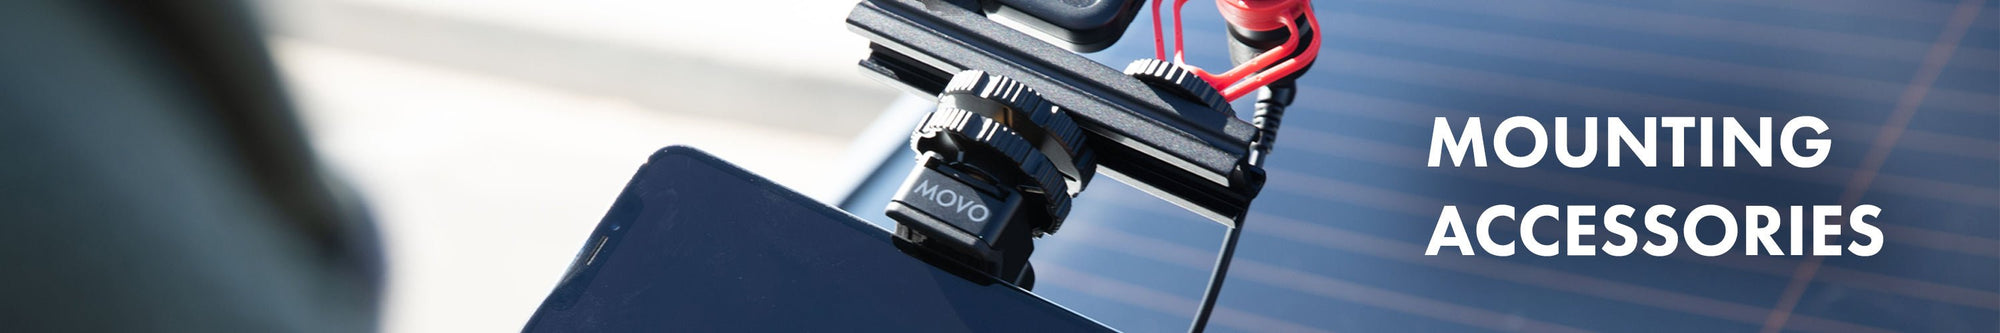 Camera Mounting Accessories